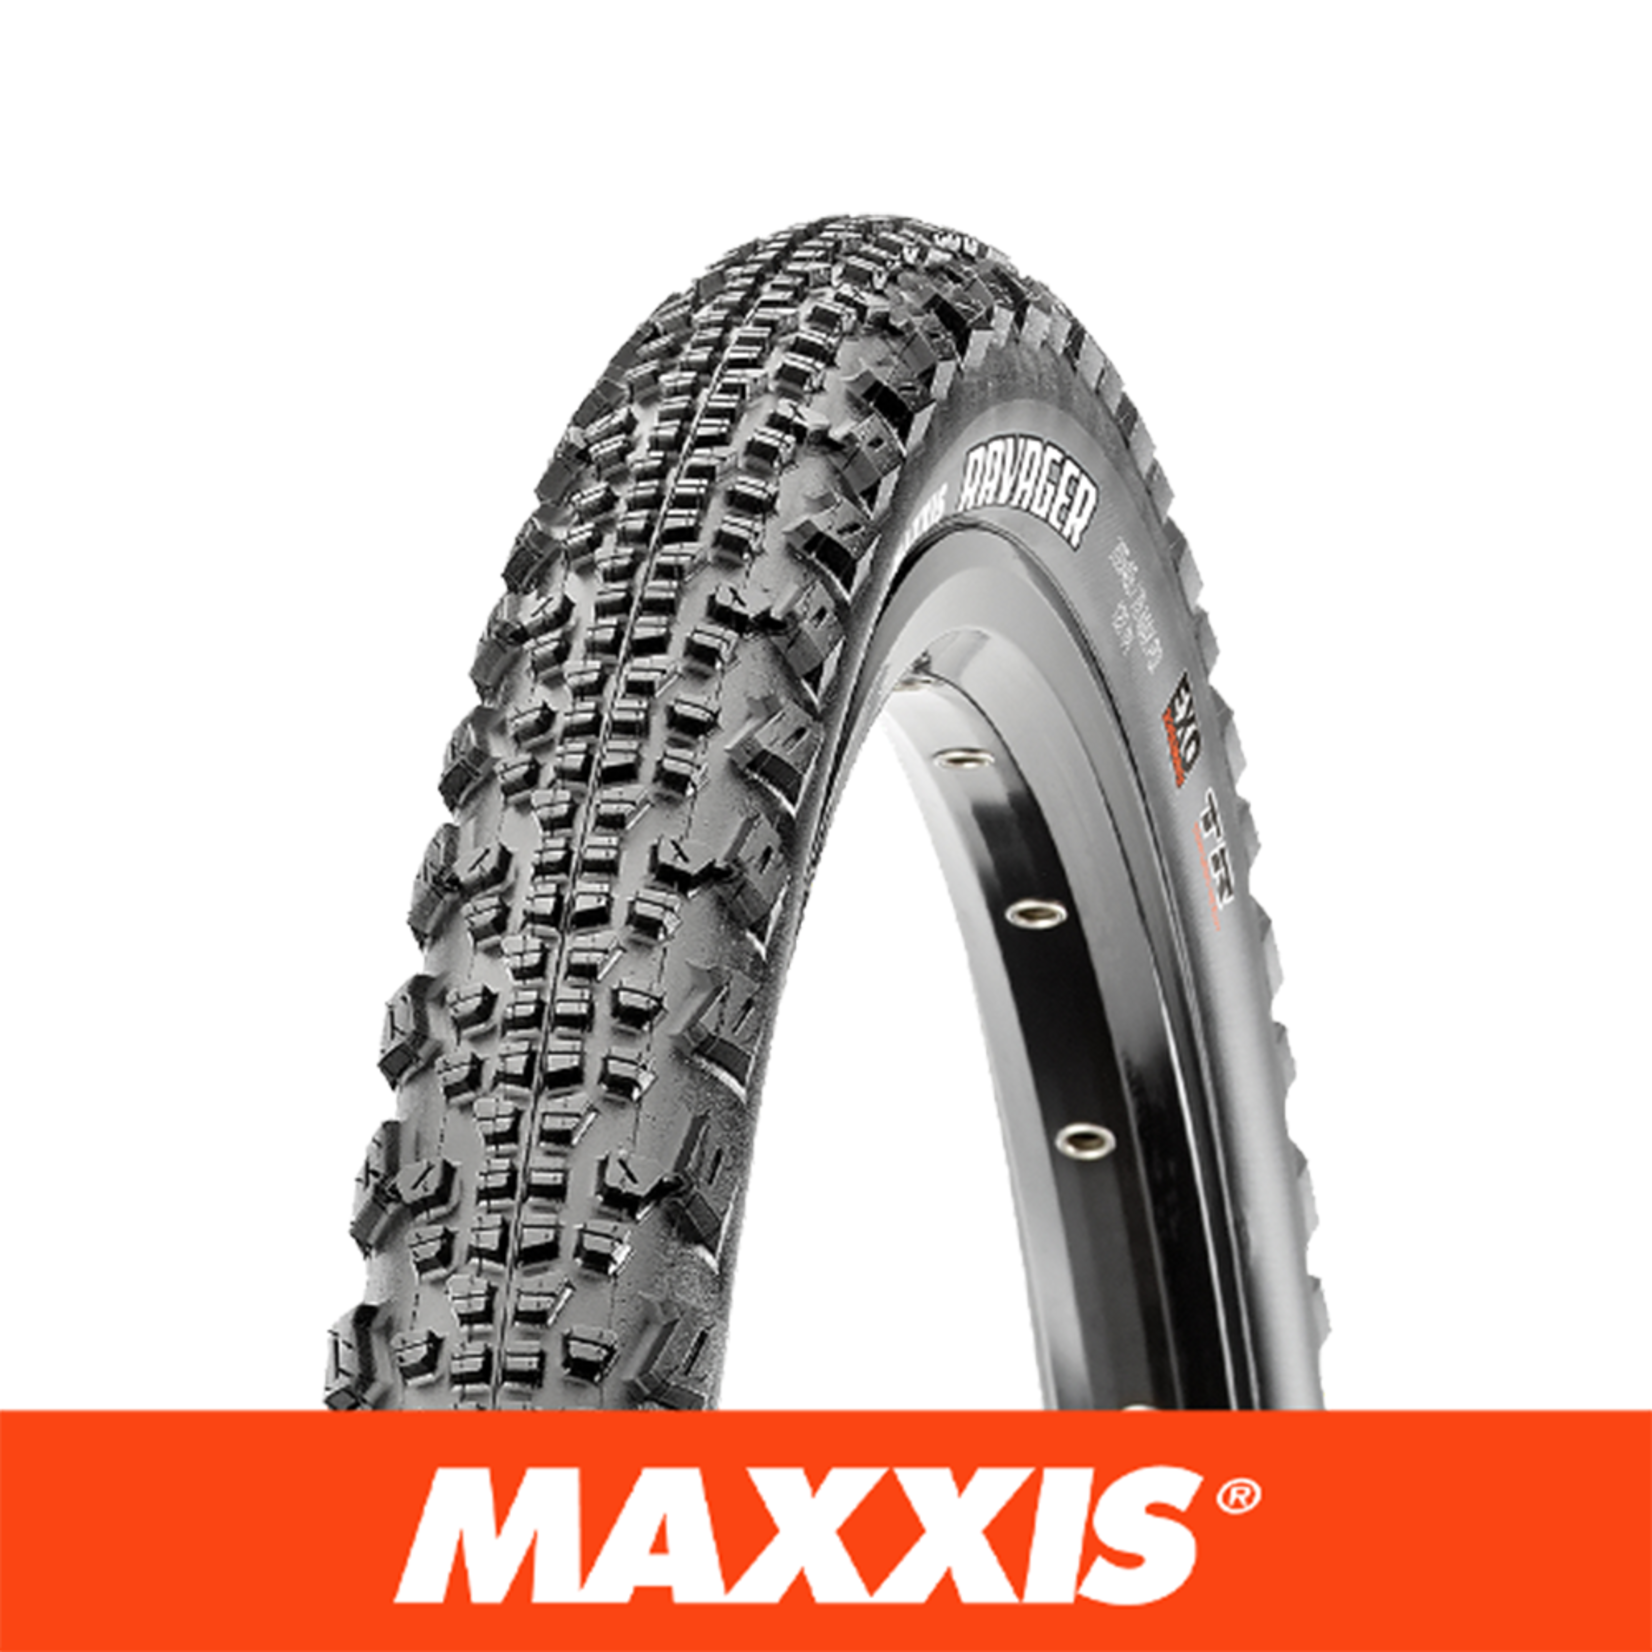 MAXXIS RAVAGER 700 X 40 EXO TR 120TPI